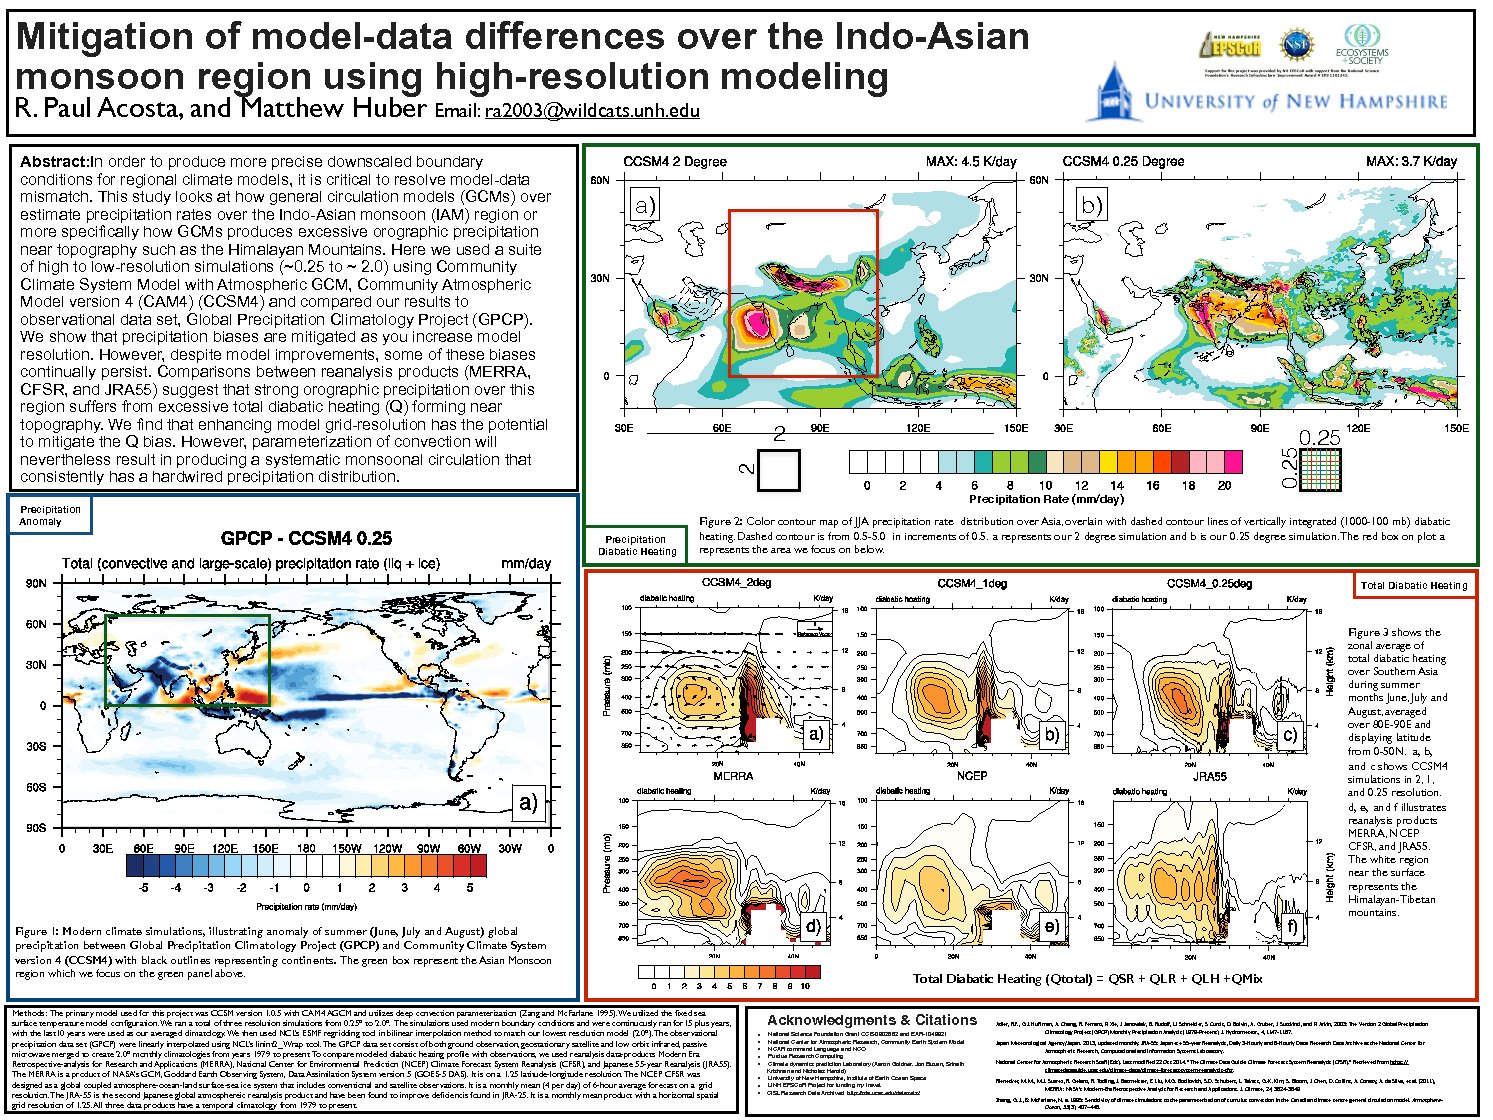 Mitigation Of Model-Data Differences Over The Indo-Asian Monsoon Region Using Hi-Resolution Modeling by ra2003